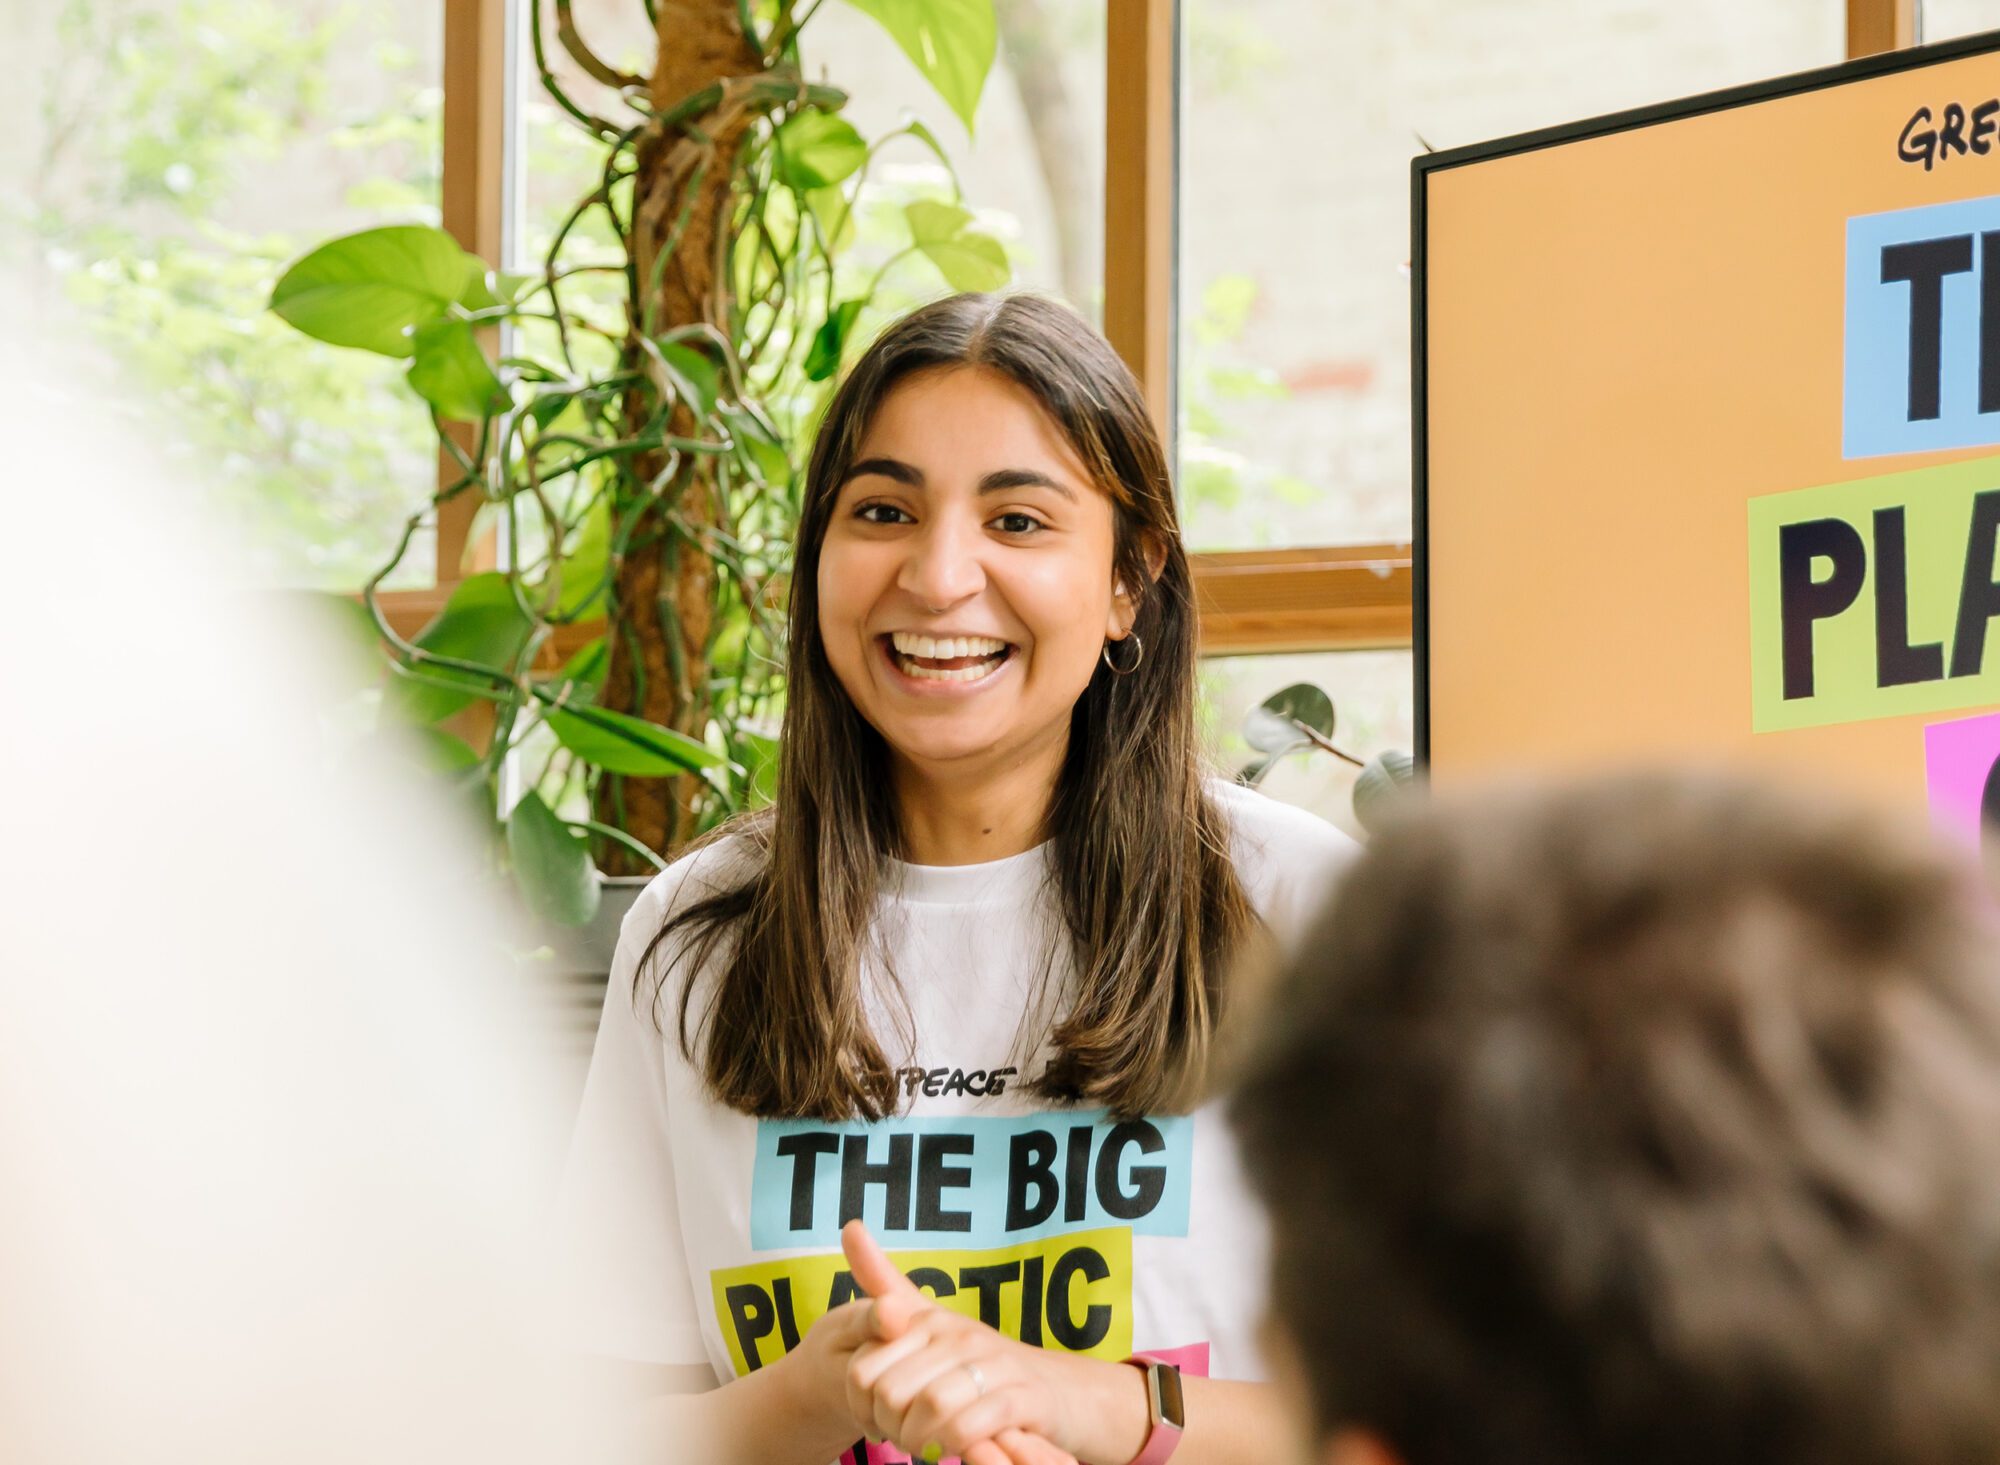 In a bright room with climbing plants in the background, a Greenpeace speaker gives an animated smile as she interacts with her audience during a talk.